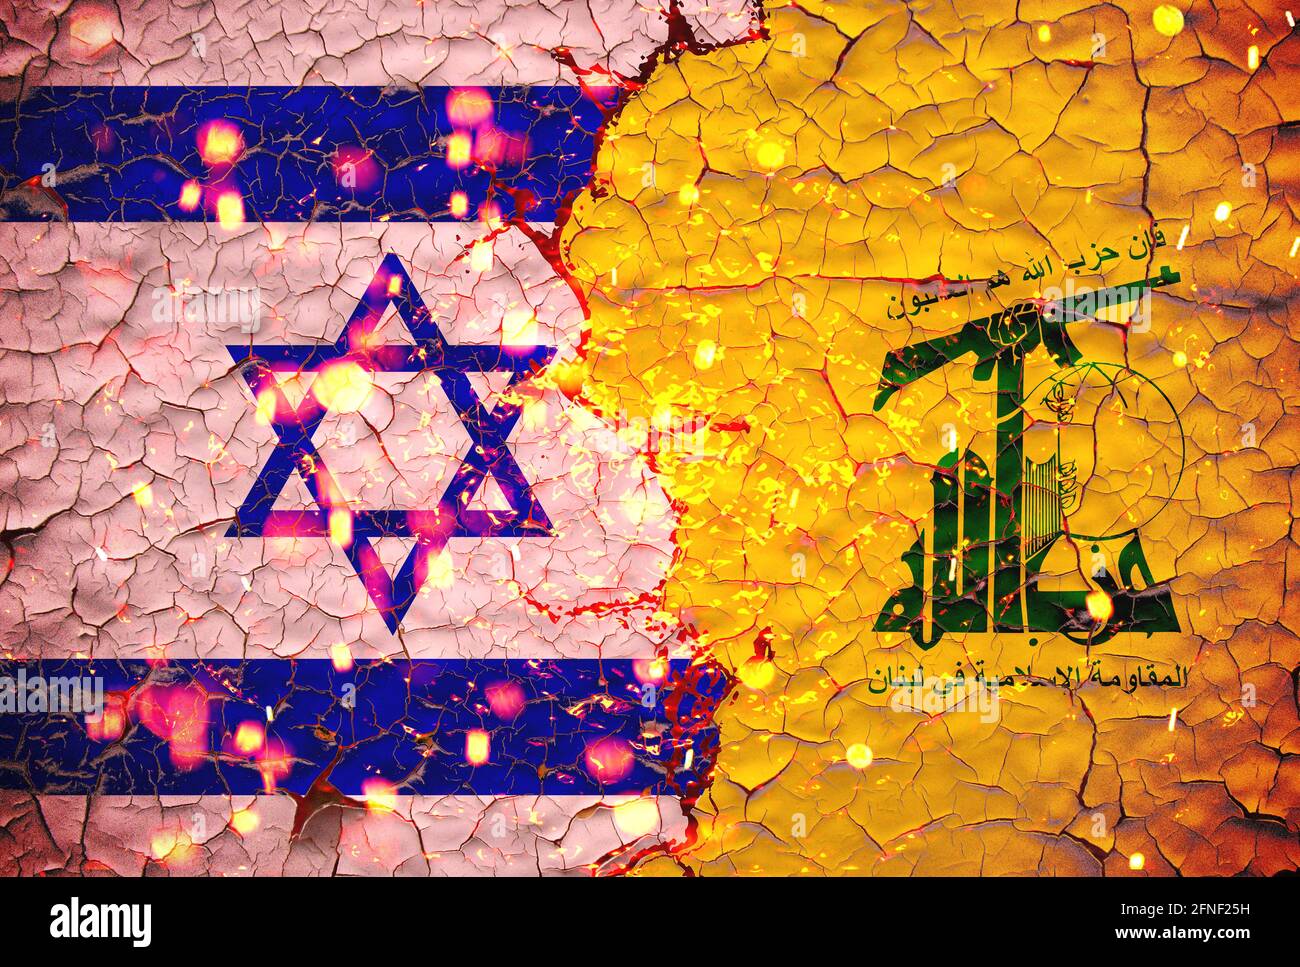 israel and Hezbollah flags painted over cracked concrete wall.And lava flows behind.israel vs Hezbollah war. Stock Photo